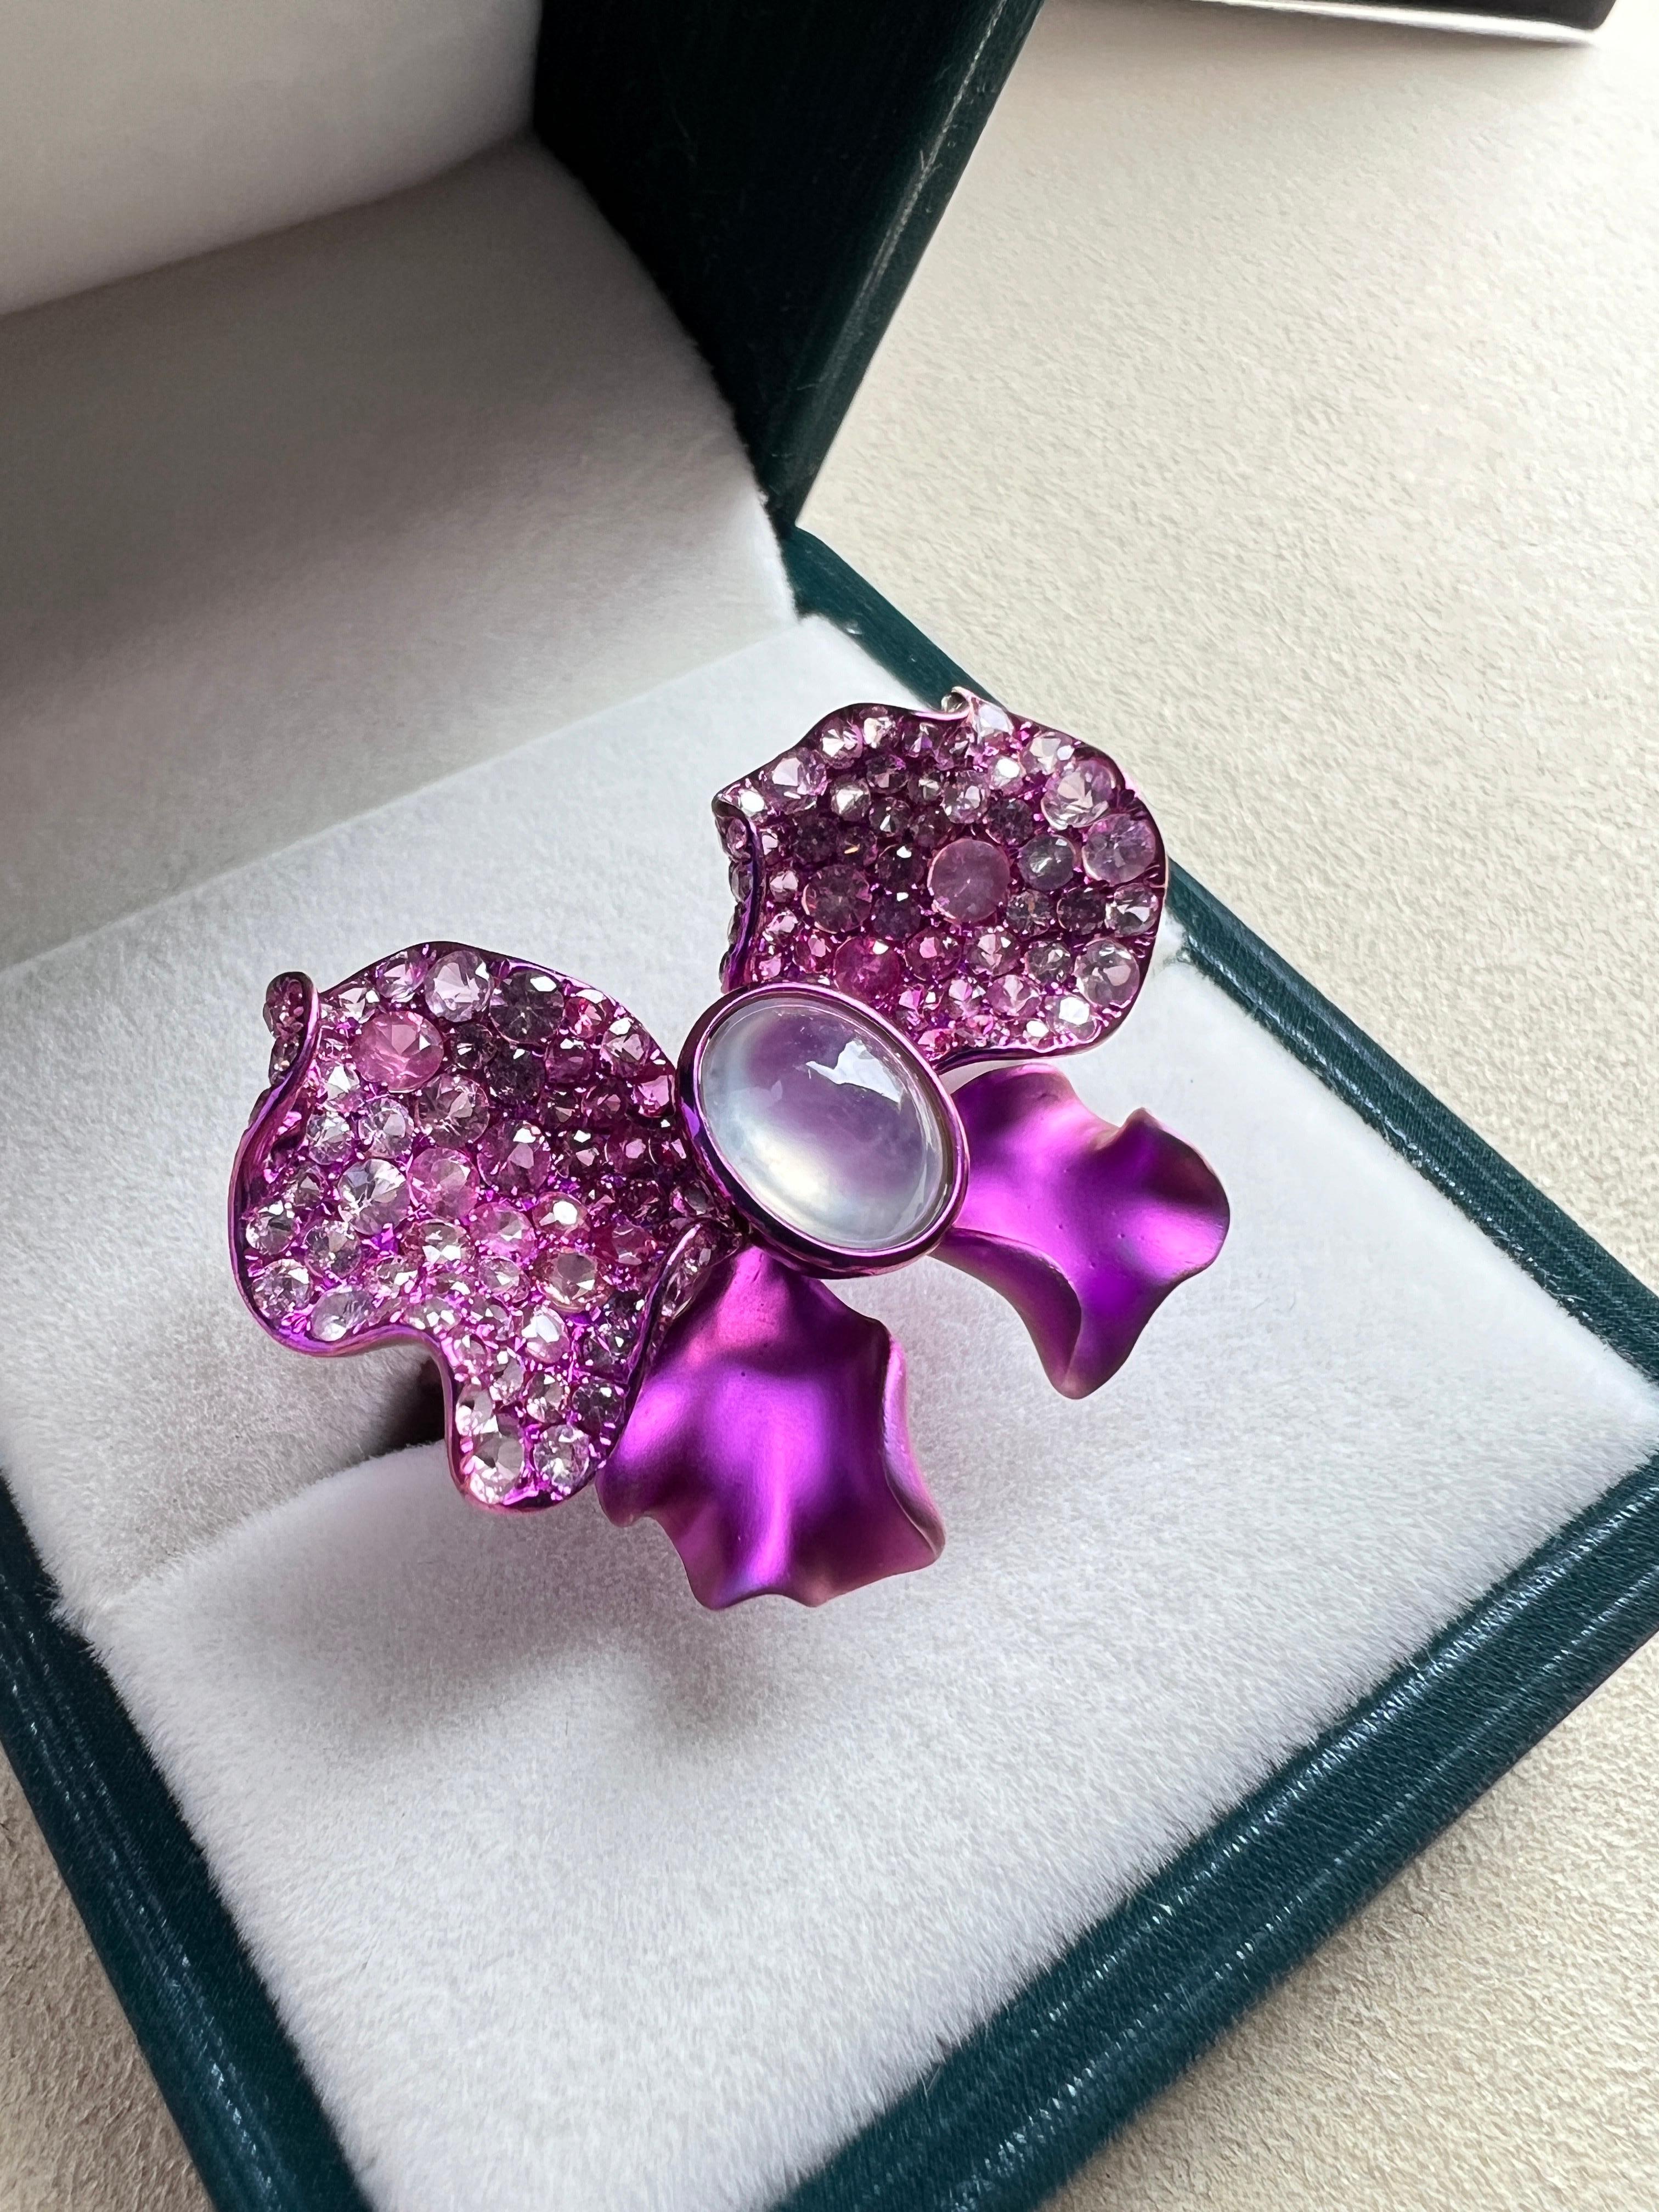 Description: Purple Titanium icy jadeite cabochon with pink sapphire ring

Material of mounting: 100% Titanium 
Center stone  Dimension approx (mm):  9*7*5mm (icy white cabochon)
pink sapphire: 127 pcs , total 3.66cts
Transparency: Transparent (Icy